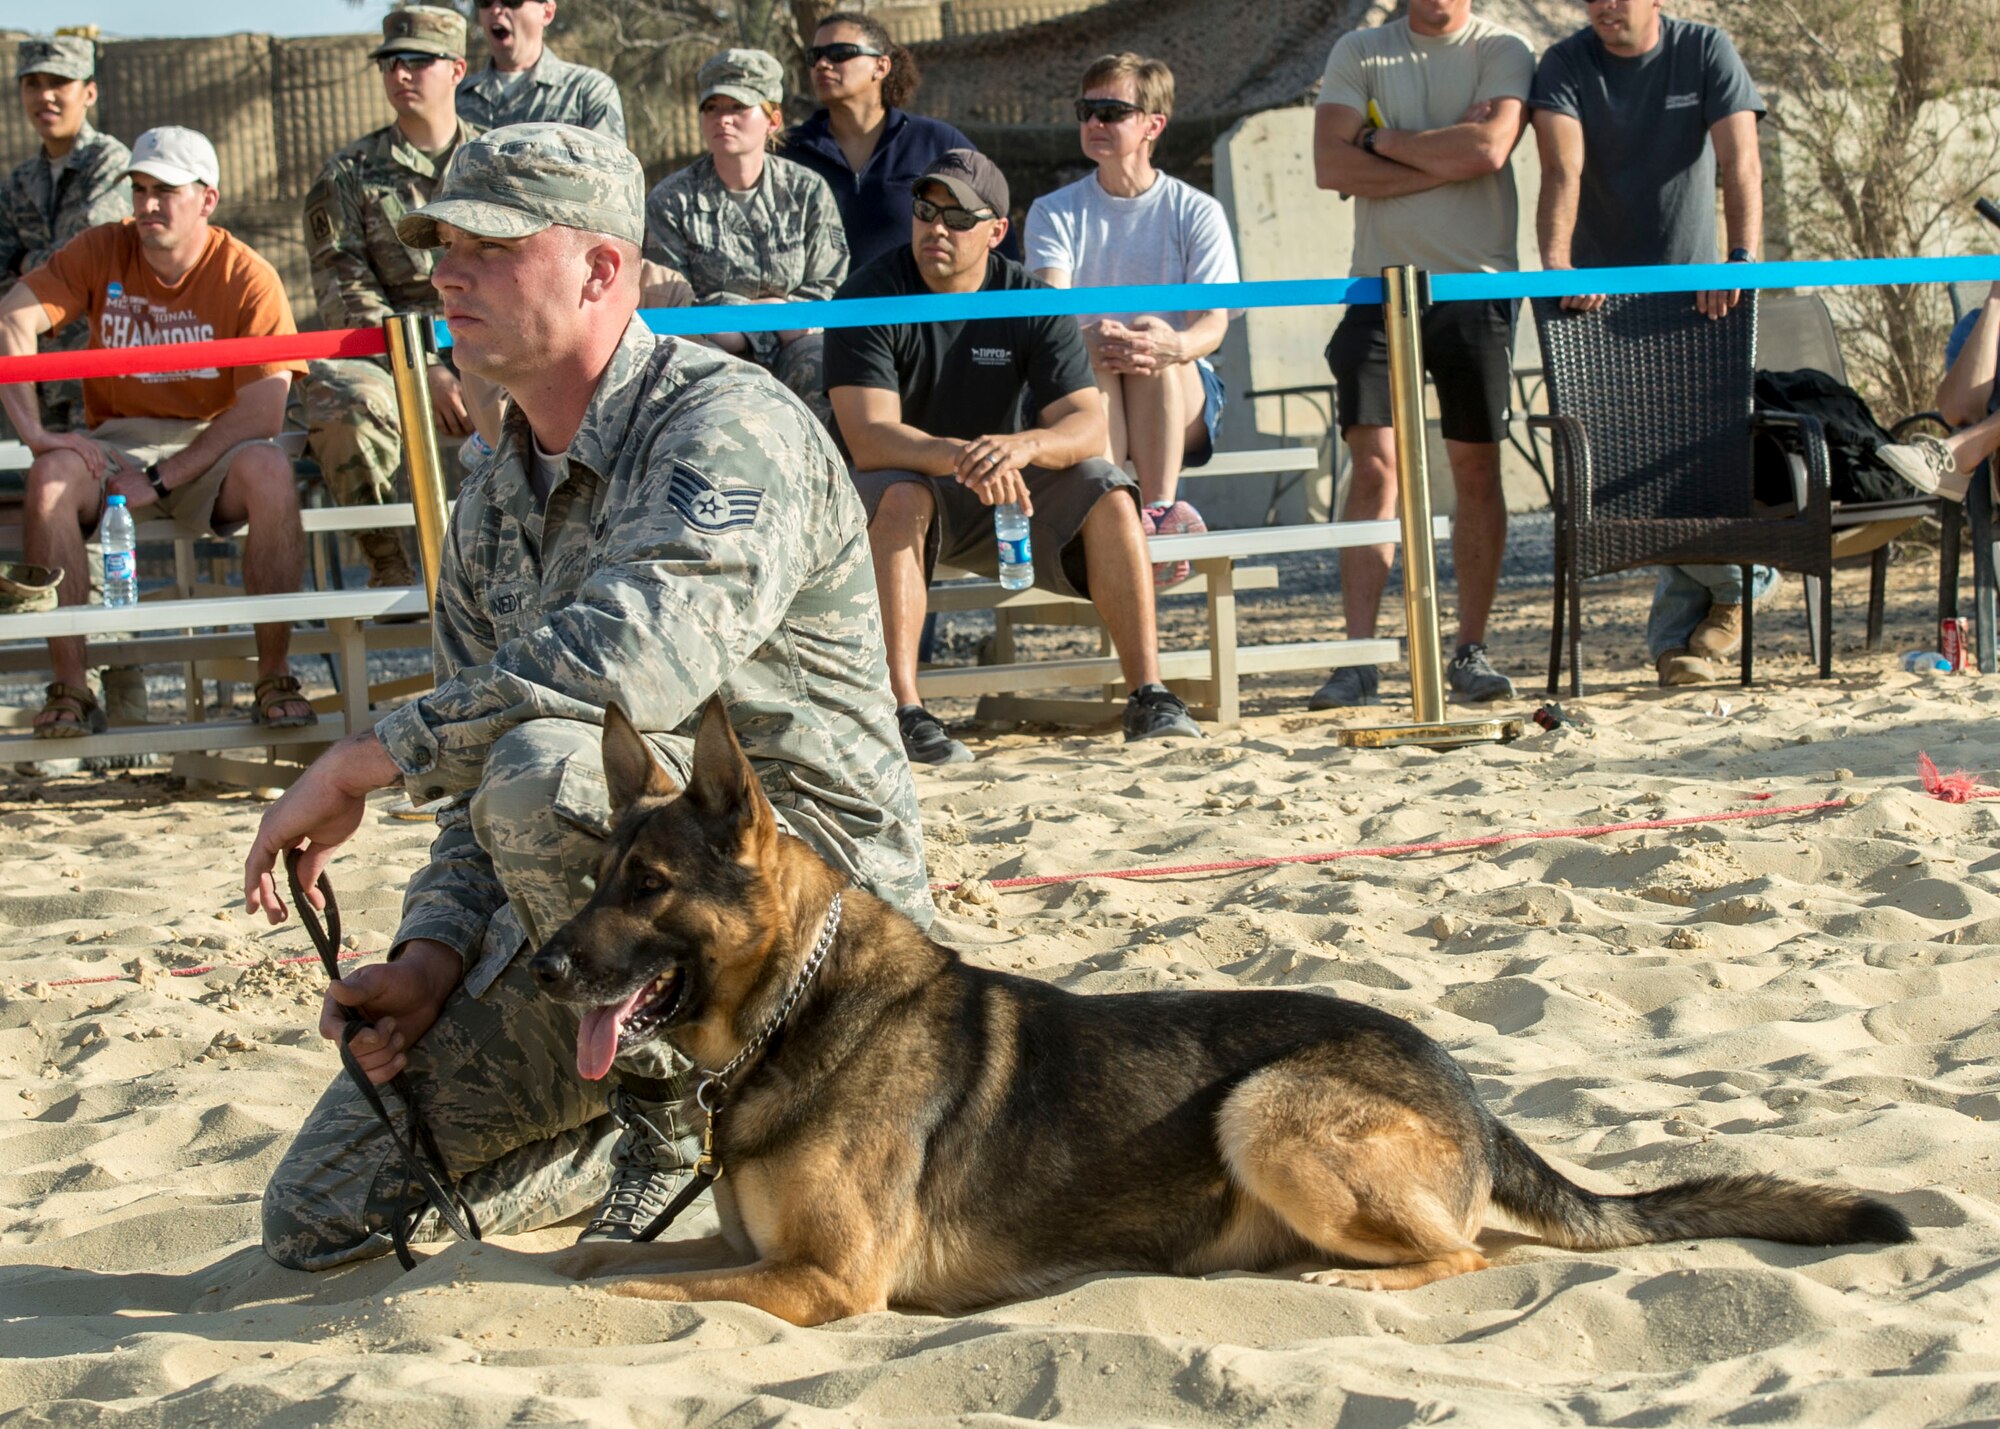 Staff Sgt. Jeffrie Kennedy, 332nd Expeditionary Security Forces Squadron military working dog handler, kneels with his dog Nico, during a demonstration, Feb. 25, 2017, in Southwest Asia. The demonstration showcased several techniques that included following commands, guarding a suspect, and attacking. (U.S. Air Force photo by Staff Sgt. Eboni Reams)